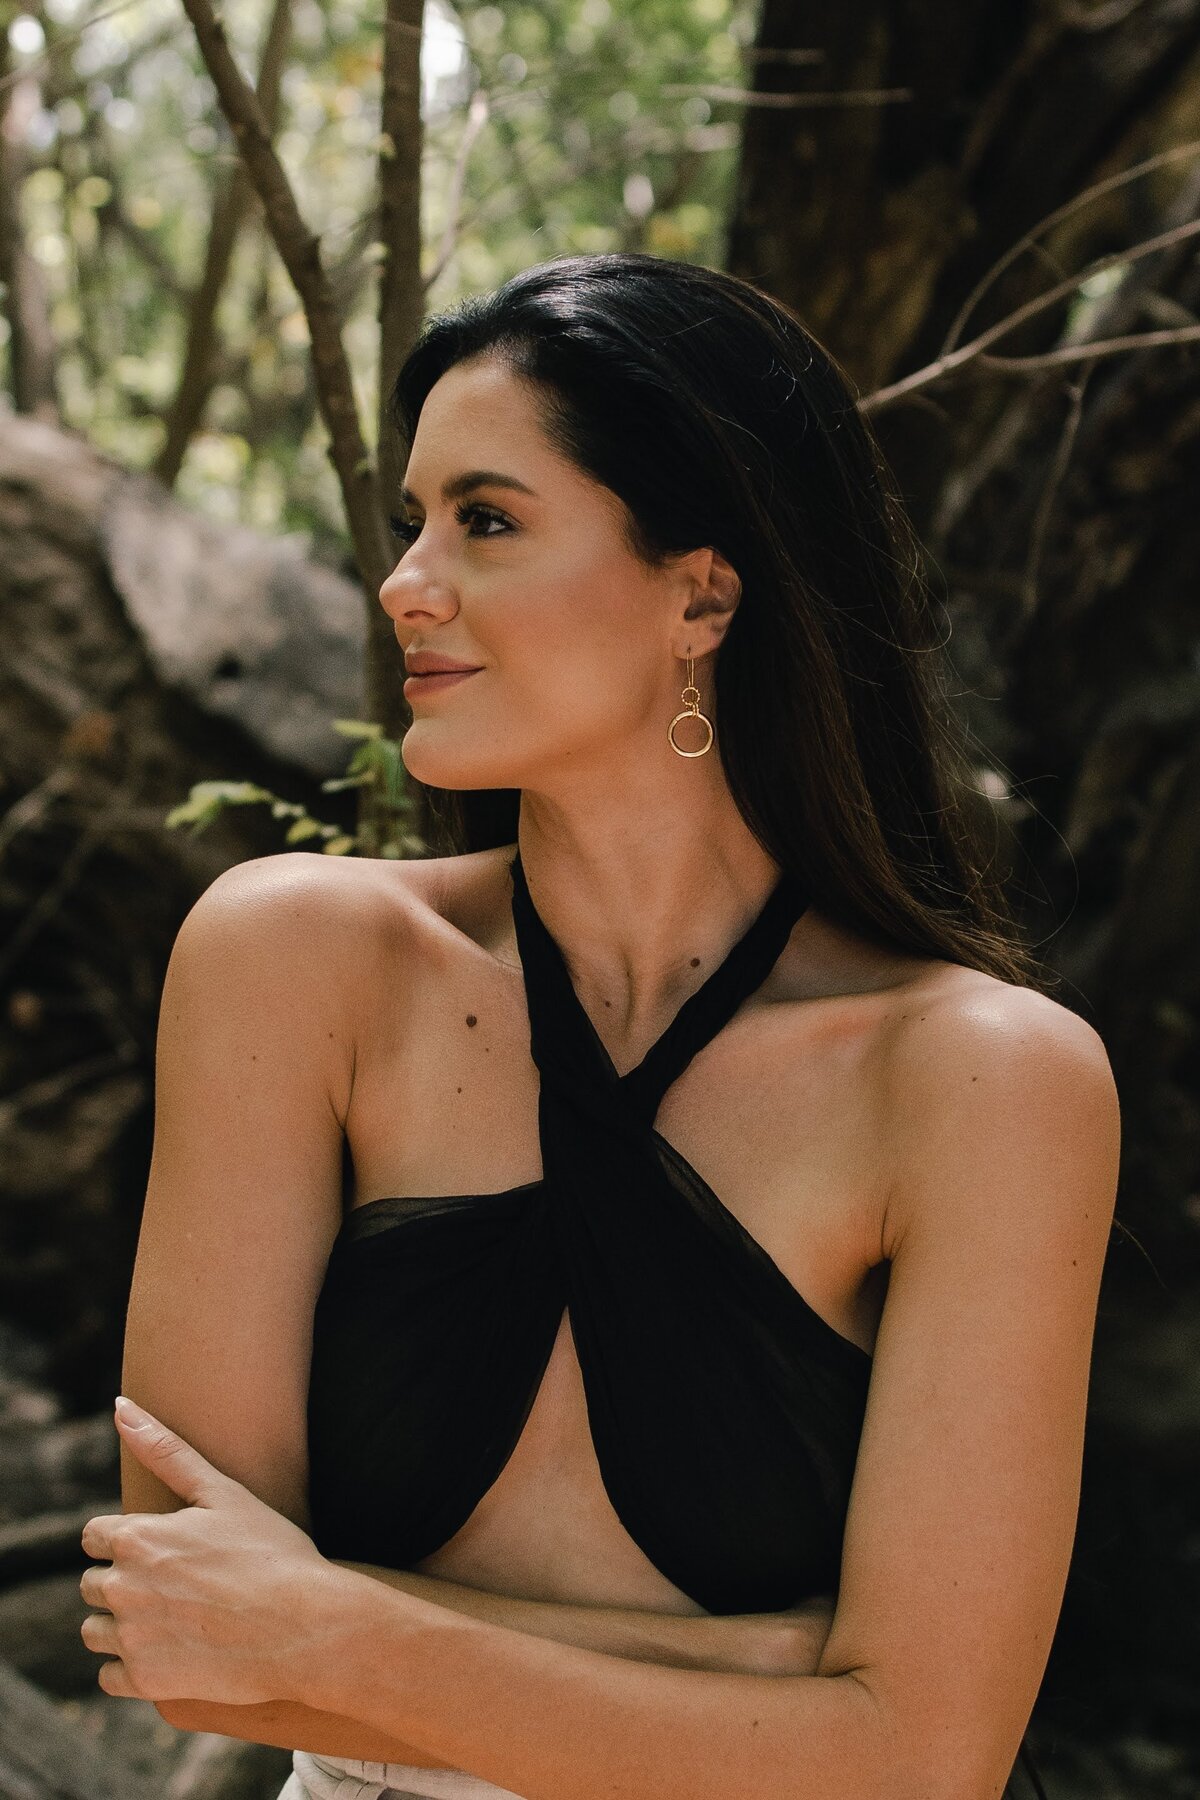 Jewelry brand destination shoot in Costa Rica by Alex Perry Photographer for Jewelry Brands